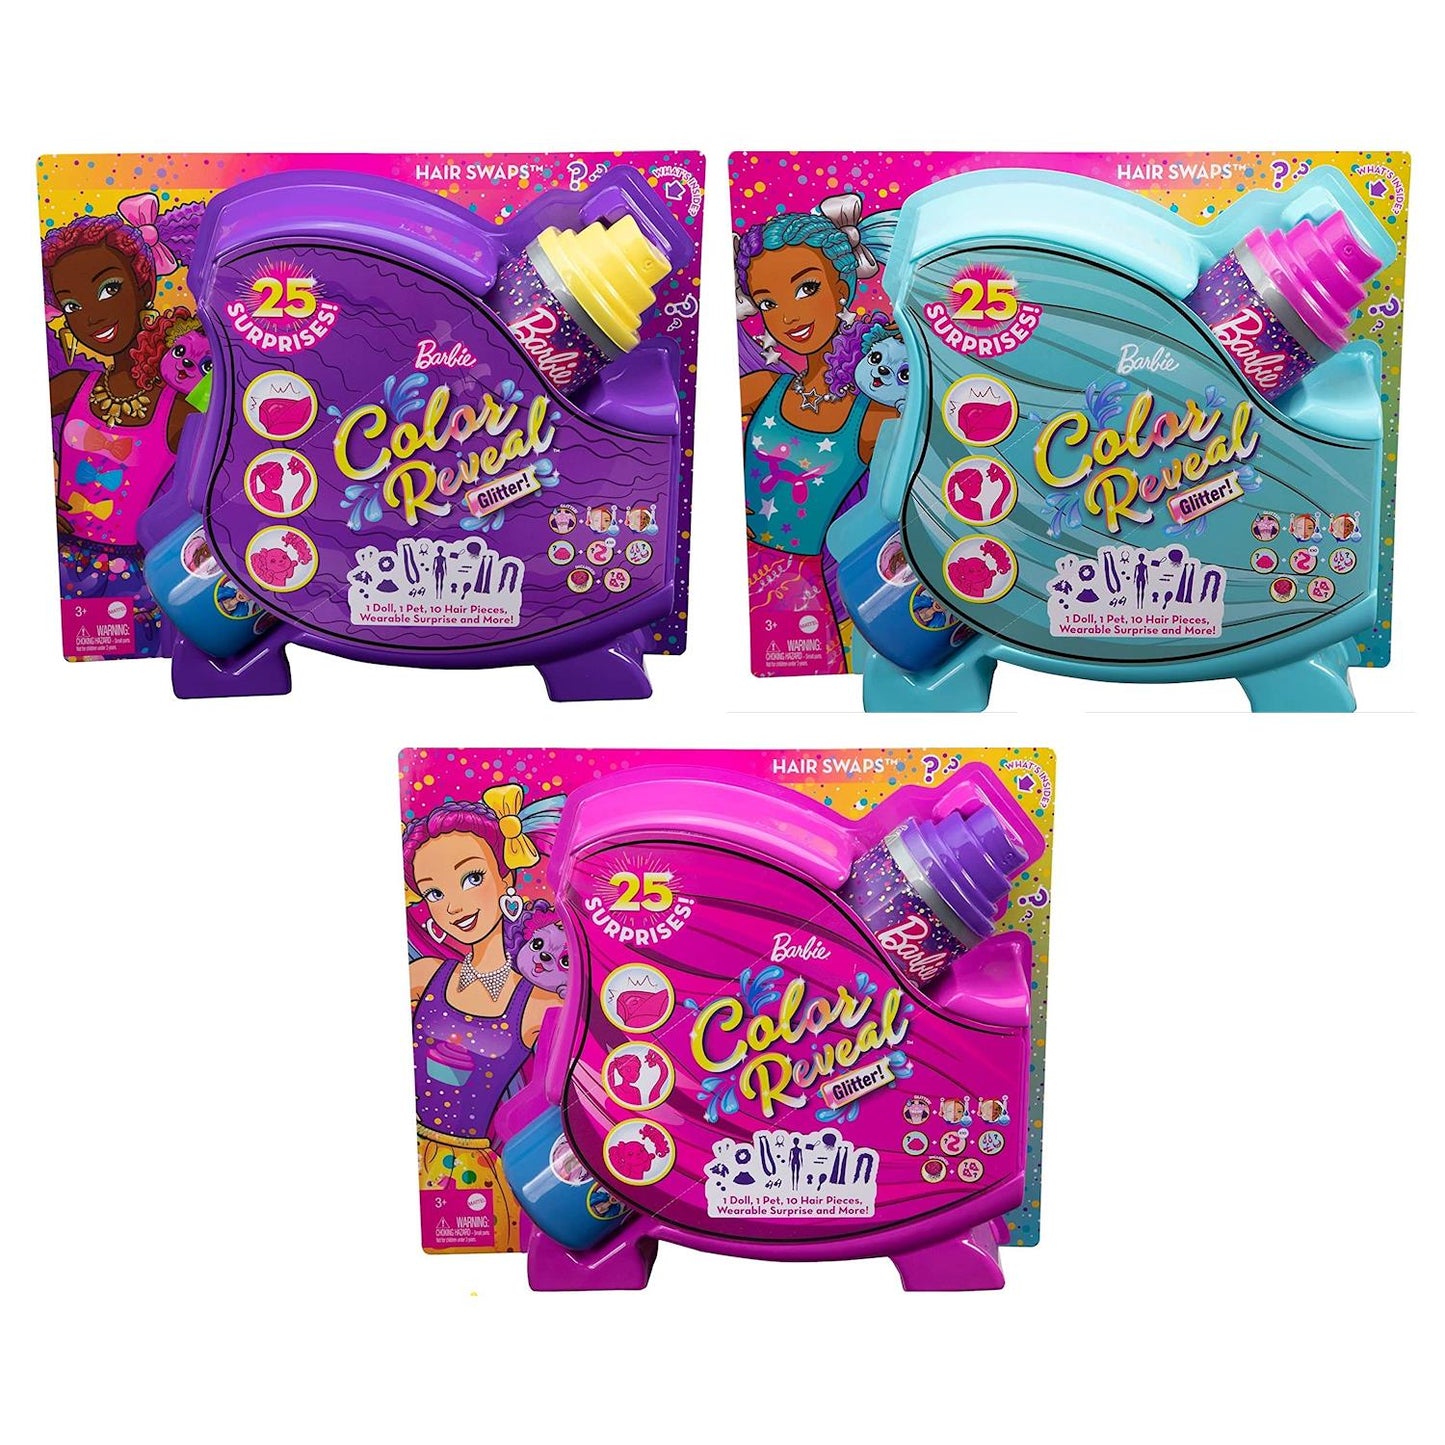 Barbie Color Reveal Glitter! Hair Swaps Doll with 25 Hairstyling & Party-Themed Surprises Including 10 Plug-in Hair Pieces